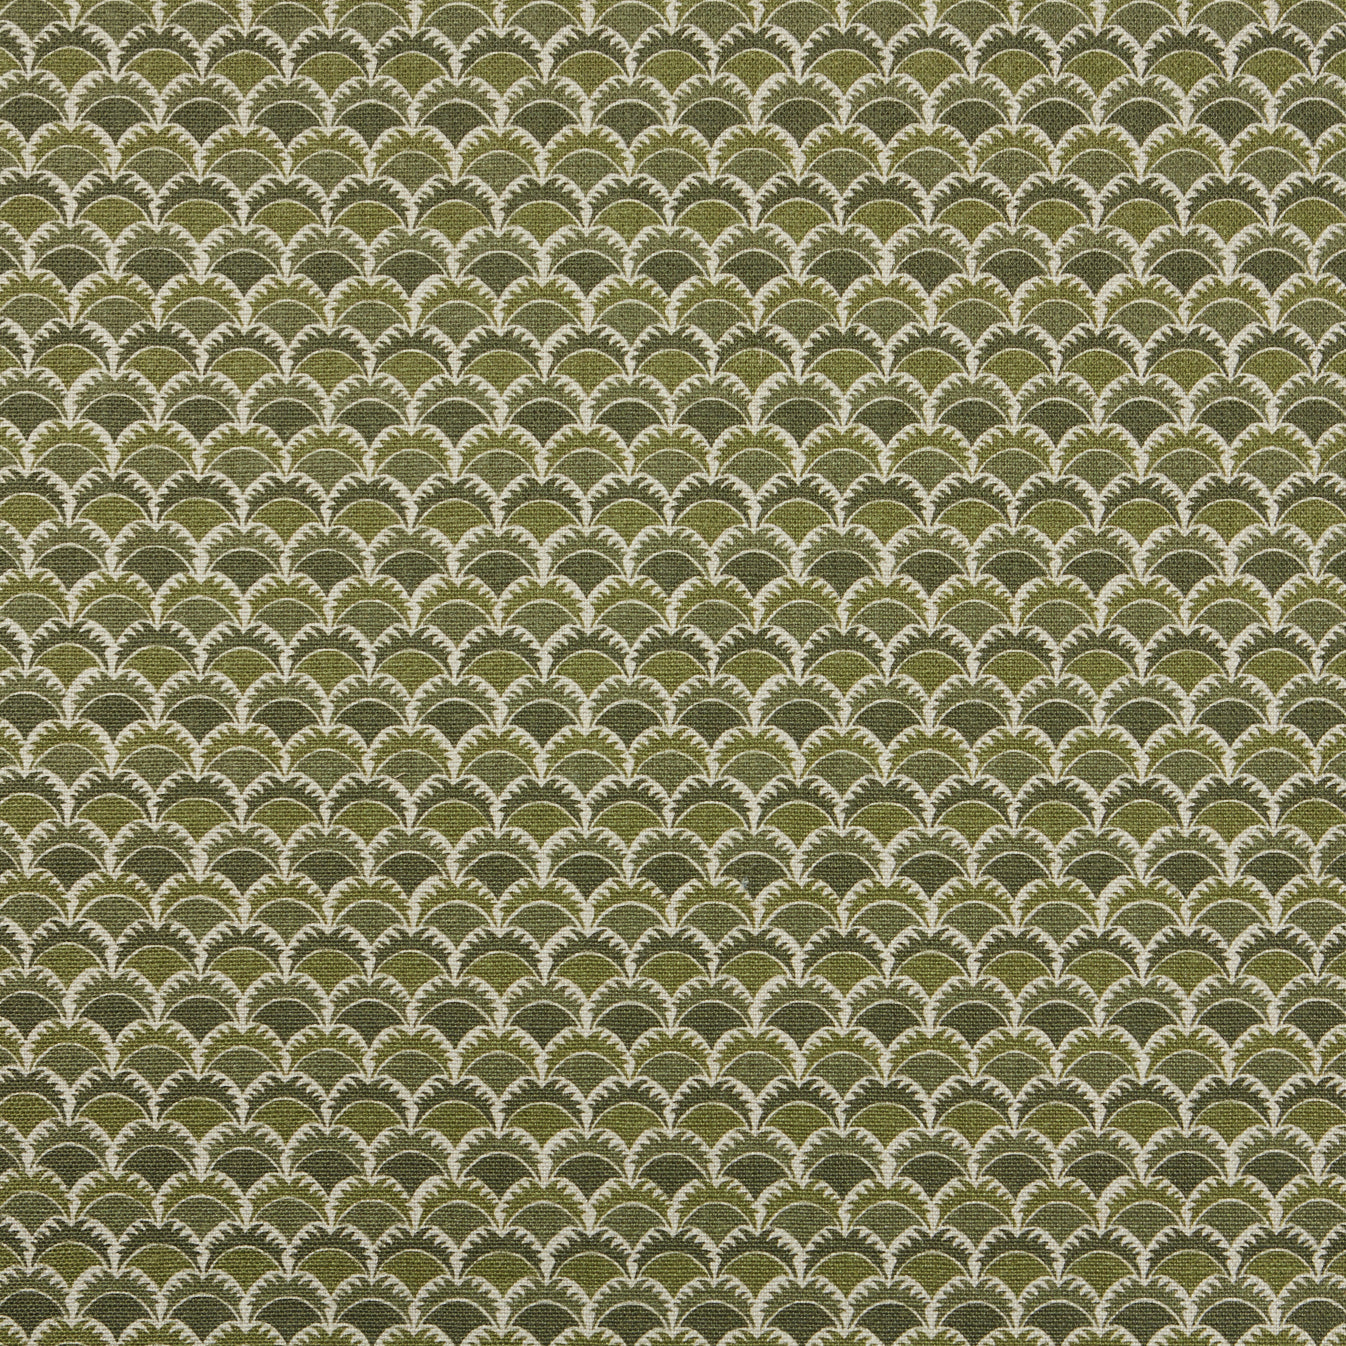 Swatch of fabric with a repeating Japanese-inspired scalloped pattern in shades of green, sage and tan.